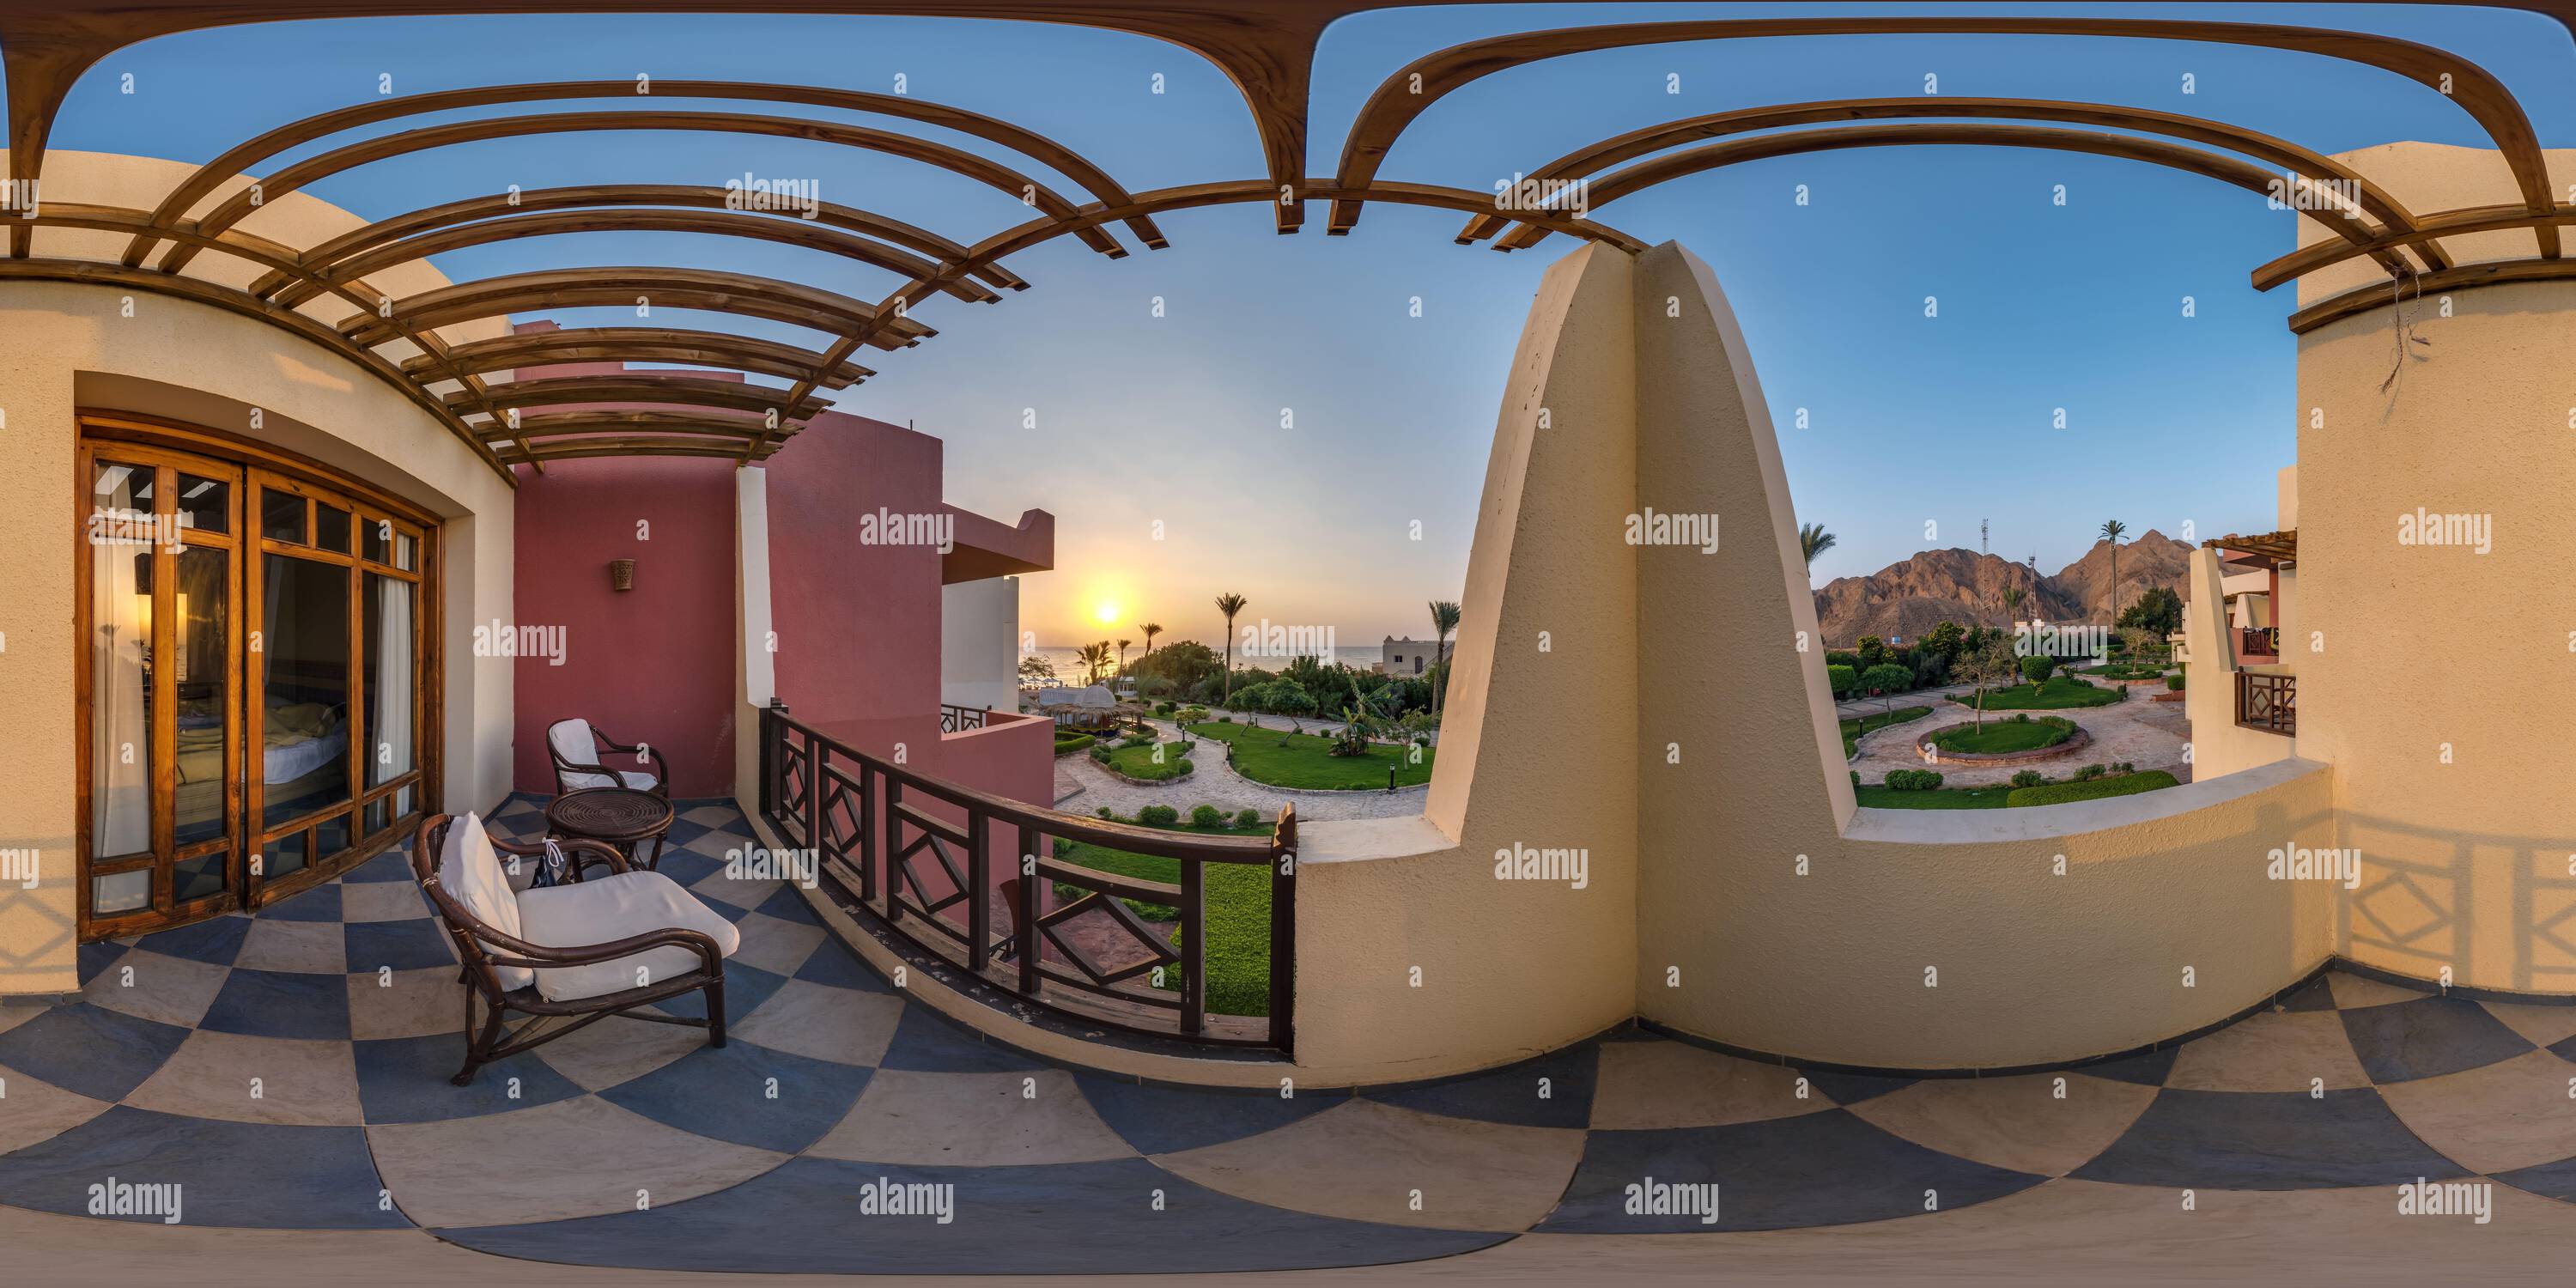 360 degree panoramic view of full seamless spherical hdri 360 panorama view on second floor of balcony or terrace overlooking sunrise or sunset overlooking the sea and palm trees